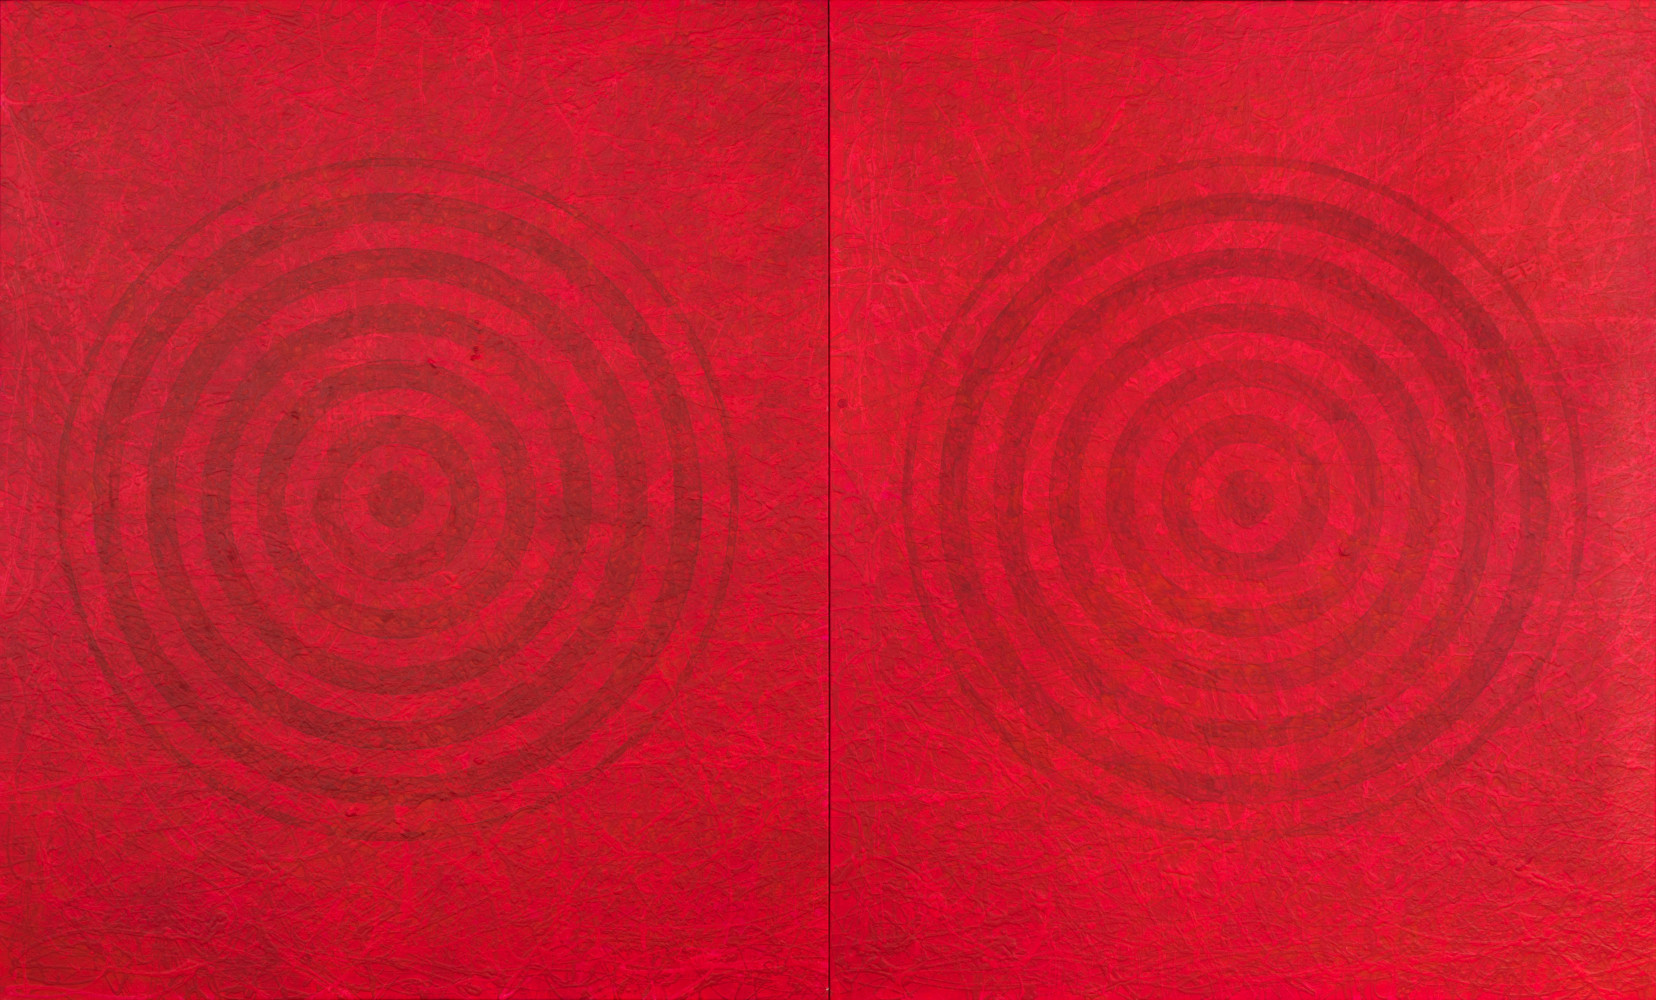 J. Steven Manolis, Redworld-Concentric, 2016, 72 x 120 inches, 72.120.01, Acrylic painting on canvas, Red Abstract Art, Large Abstract Wall Art for sale at Manolis Projects Art Gallery, Miami, Fl